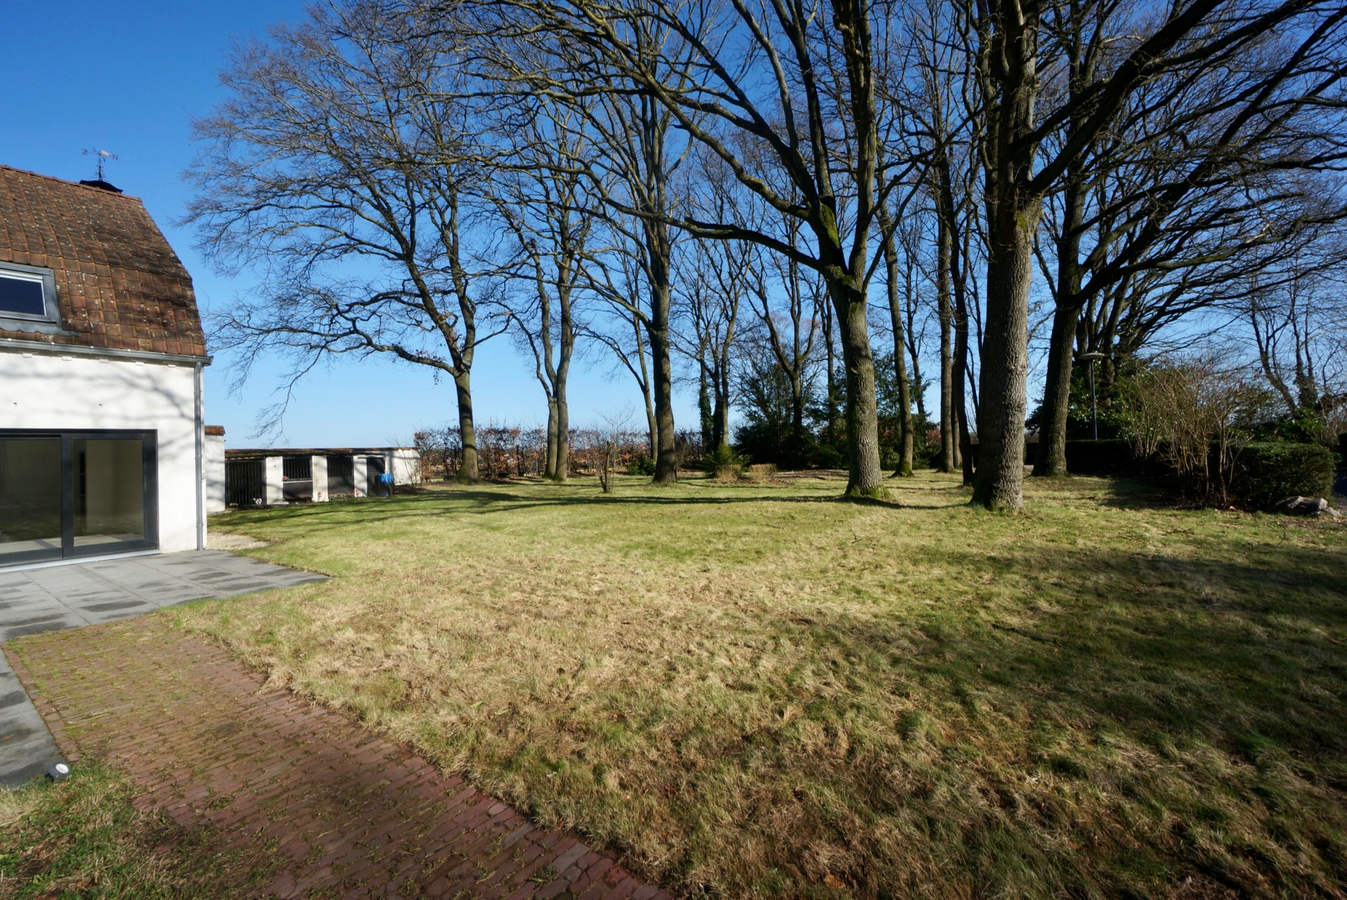 Property sold in Gruitrode